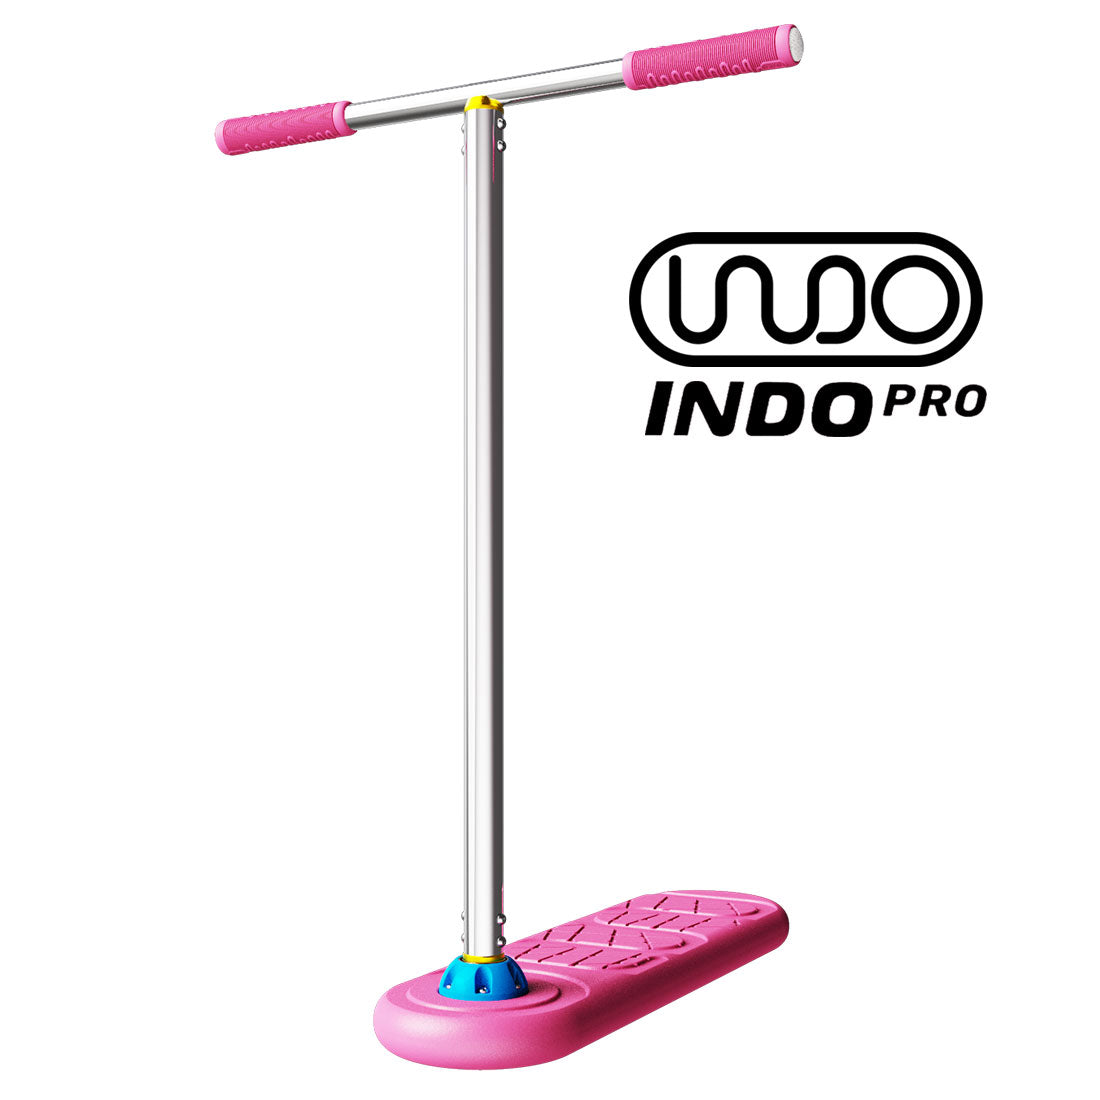 INDO PRO 740 Tramp Scooter - Pink Pop Scooter Completes Trick